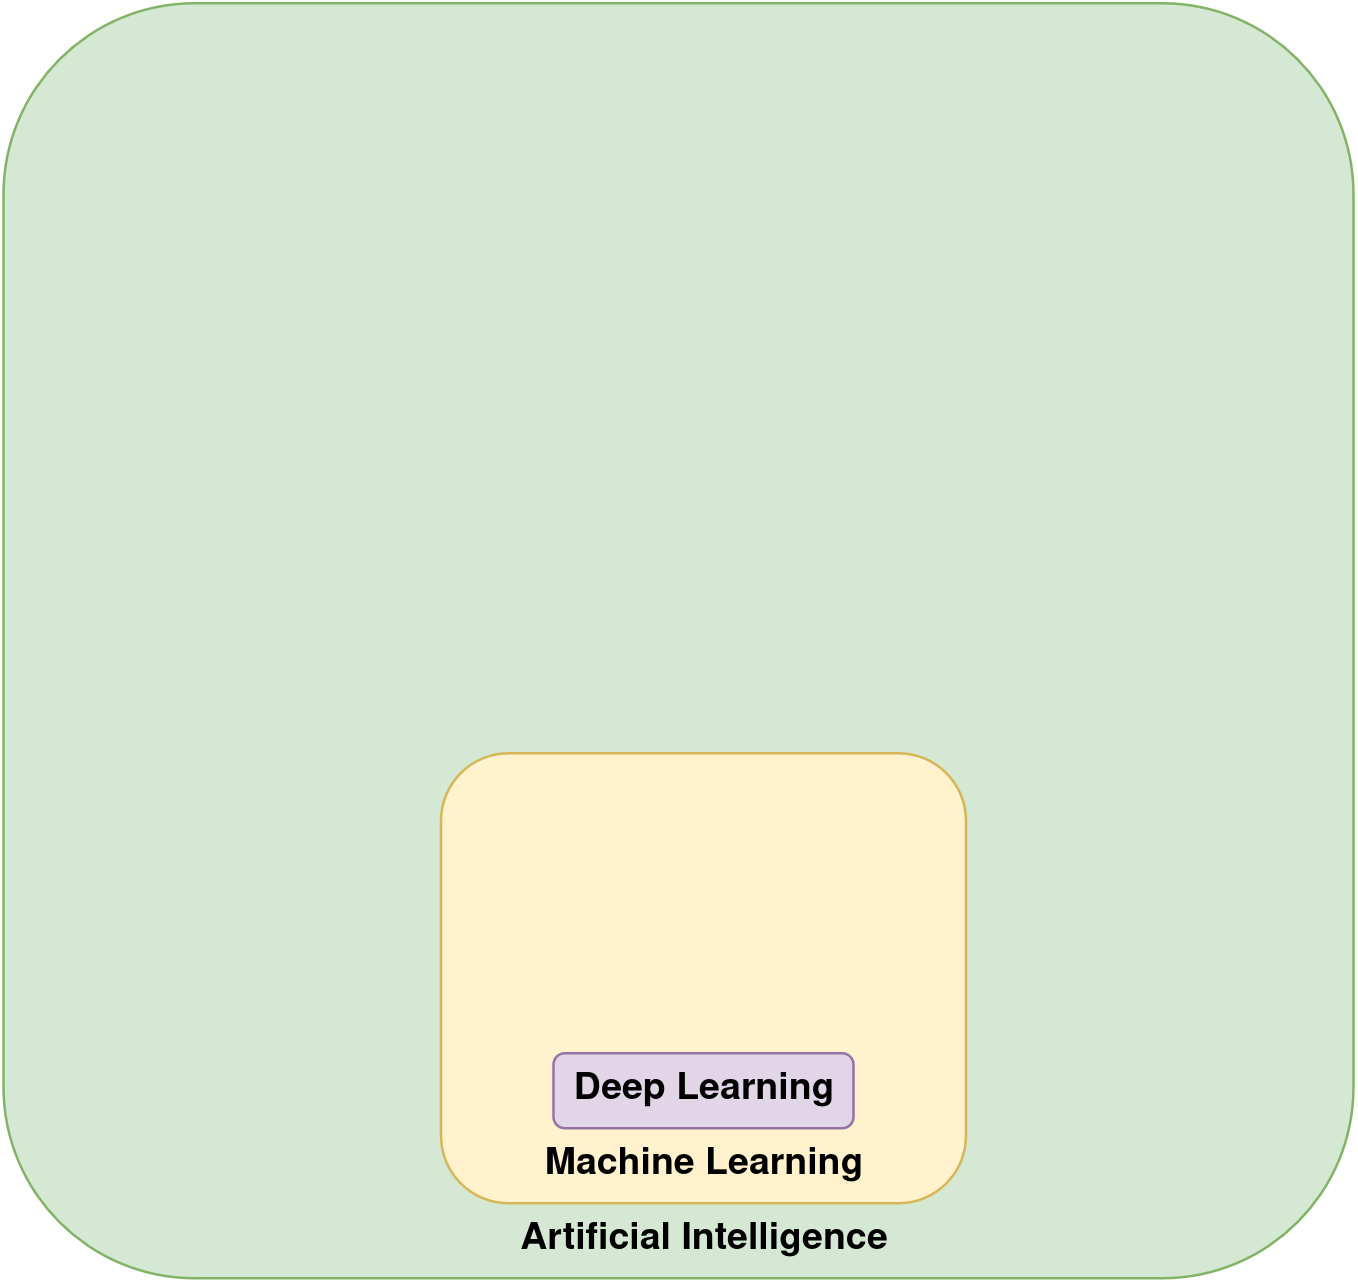 Illustration of how the fields of Deep Learning and Machine Learning used to relate to the field of Artificial Intelligence